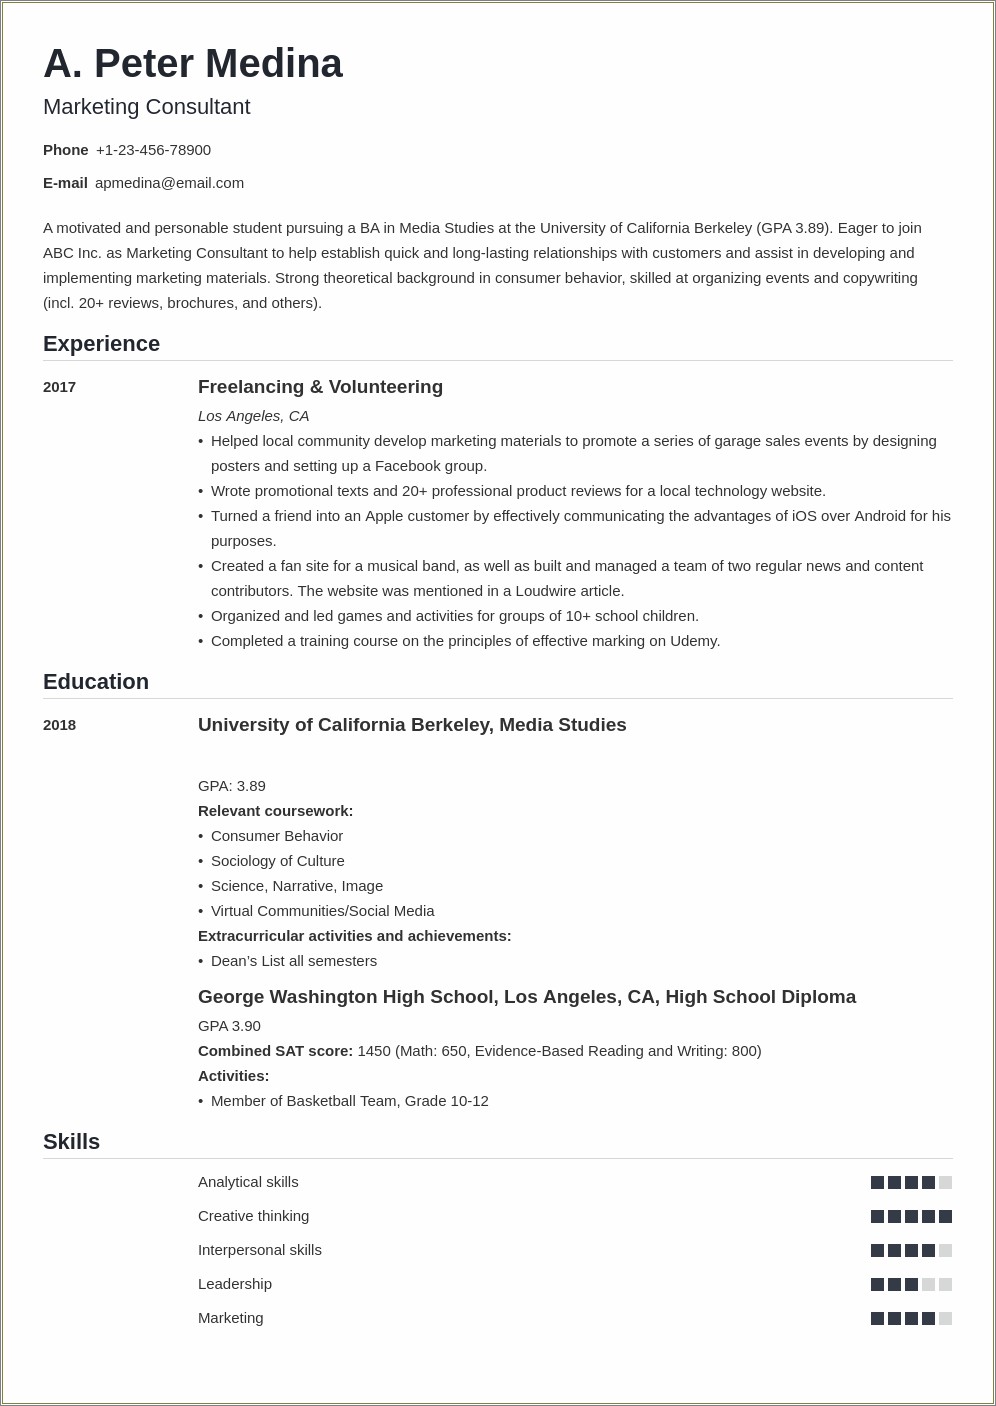 Resume Full Time Versus Part Time Experience